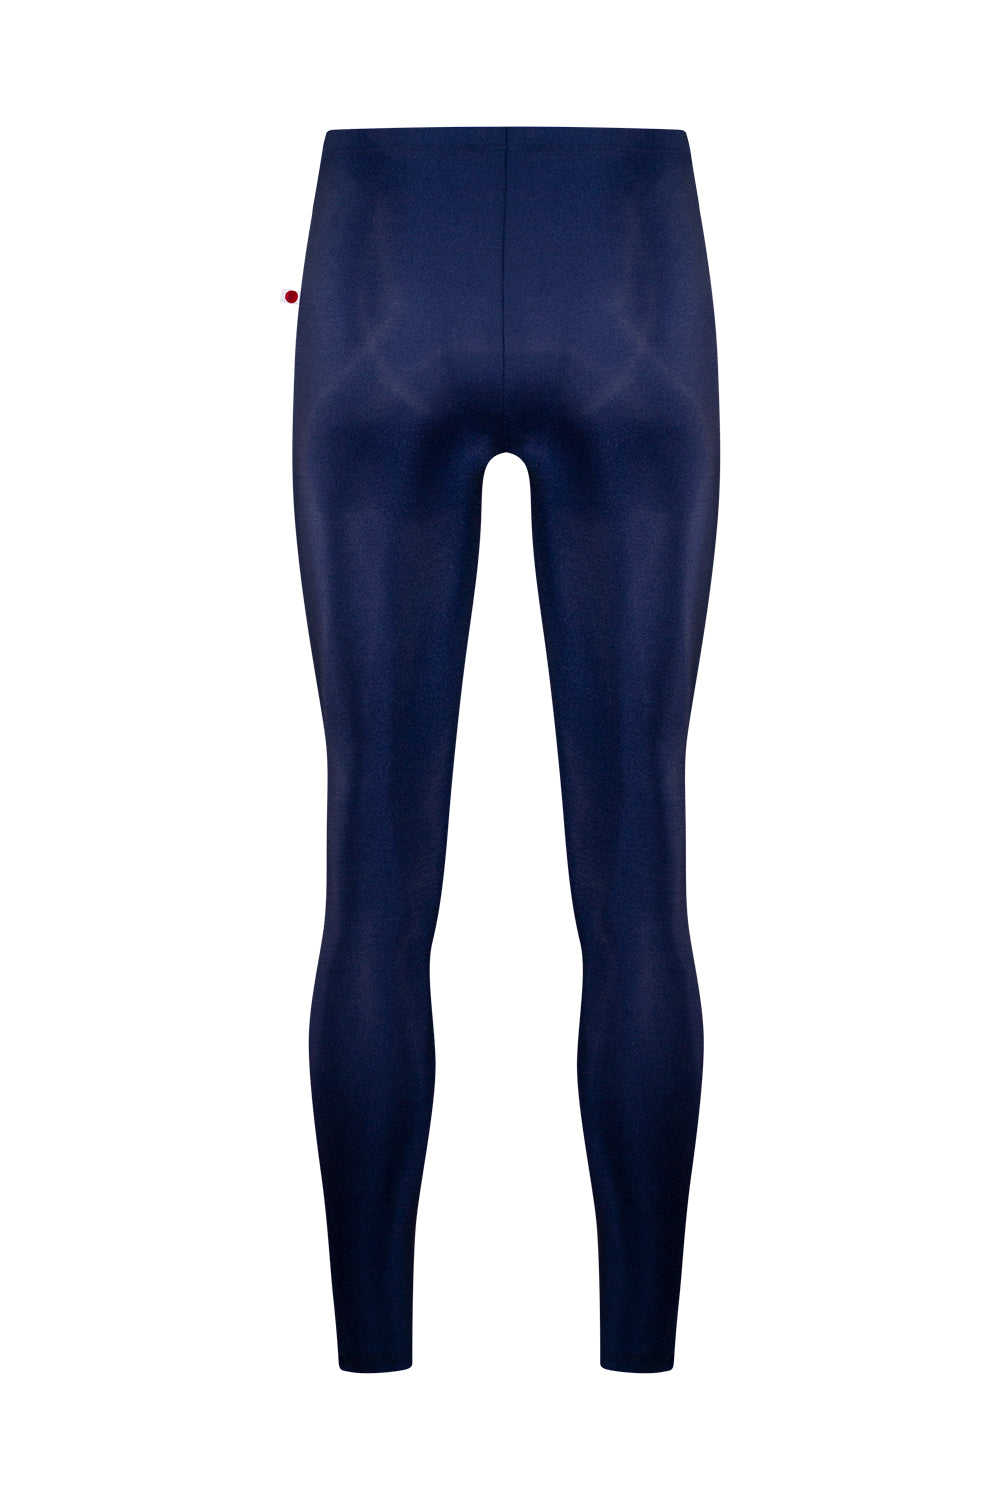 Cedric tights in N-Dark Blue body color with V-White side stripe and High-Waist 